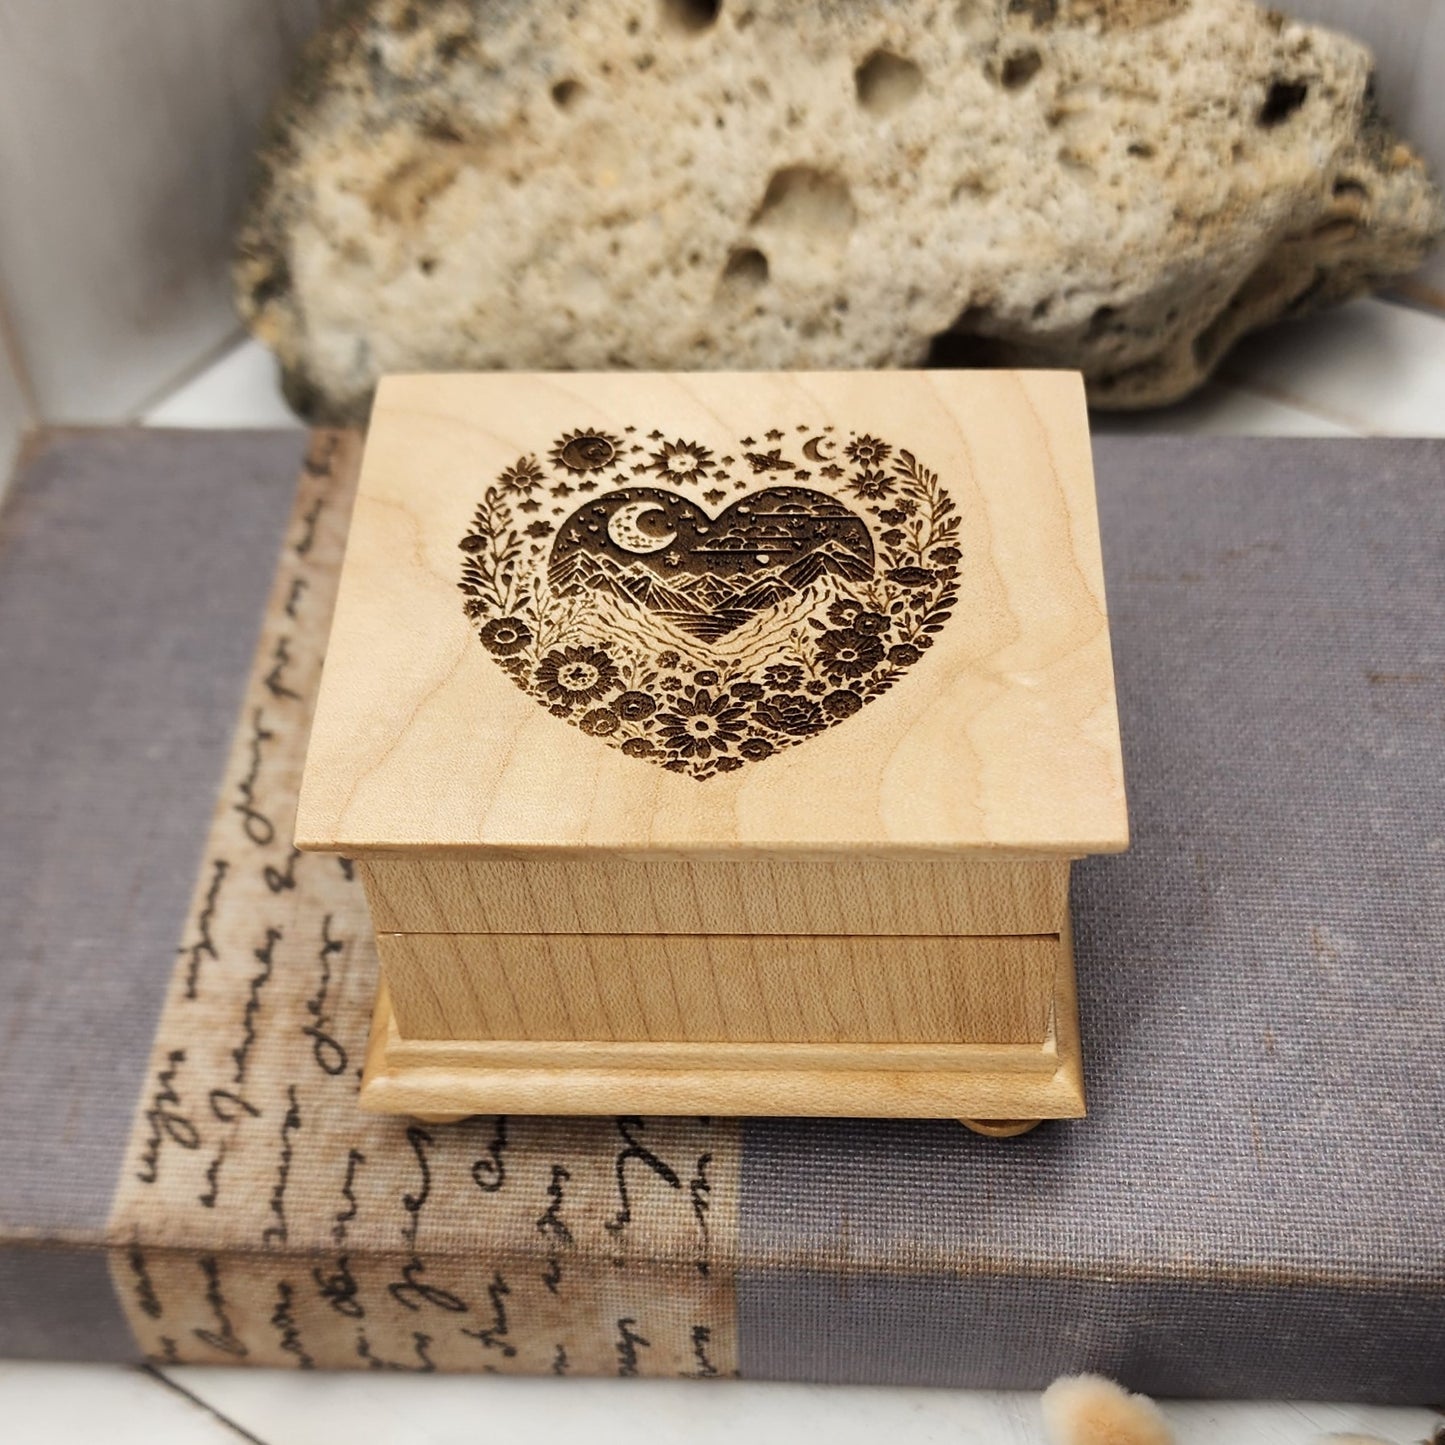 heart music box with a mountain design engraved inside the heart along with moon and stars, flowers and mountains, music box shop, music box store